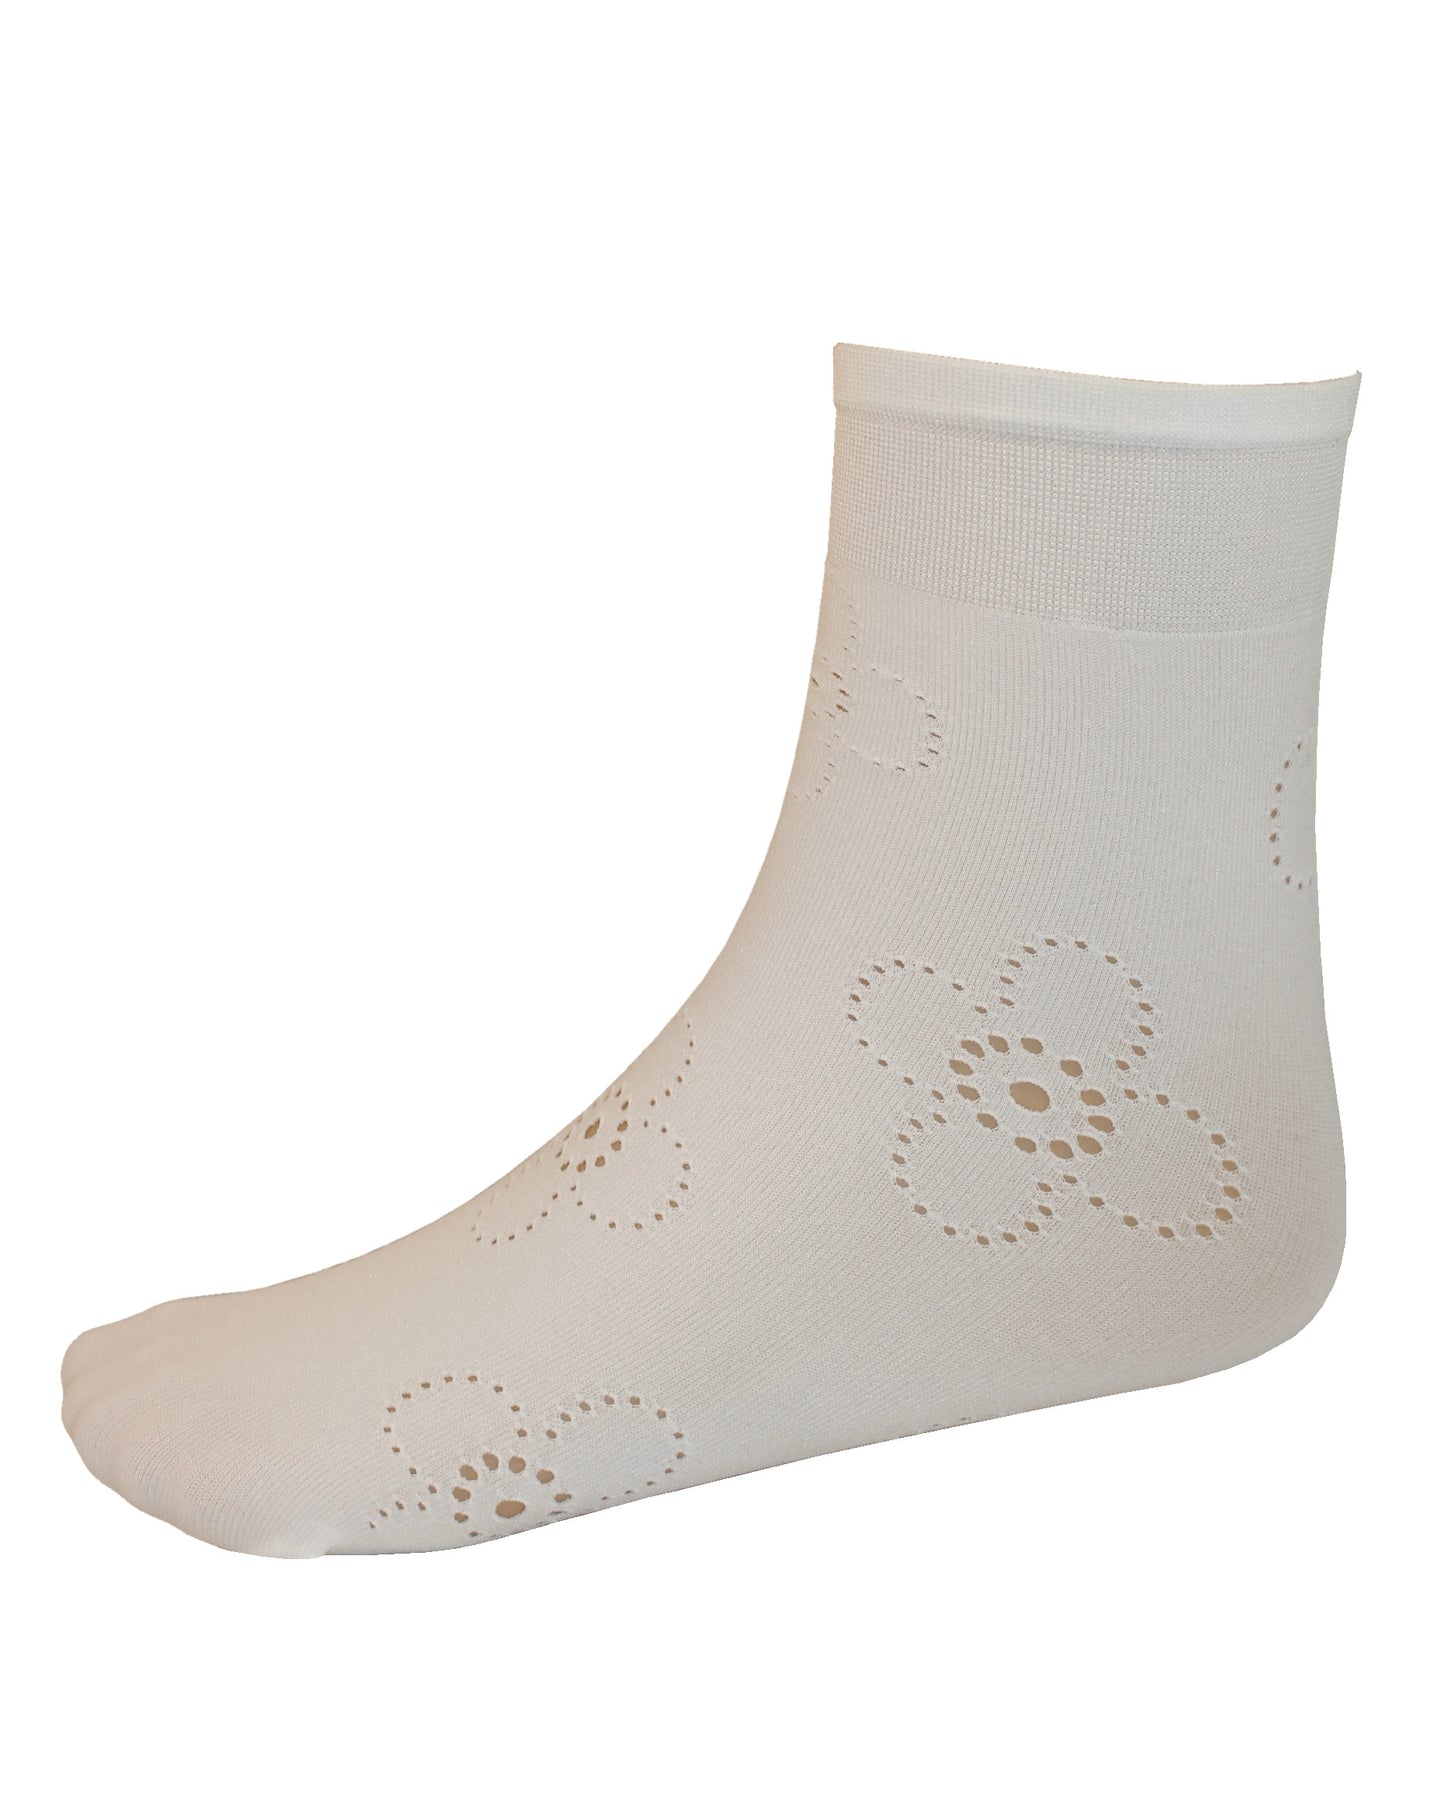 Omsa Flore Calzino - Kid's white opaque children's fashion ankle socks with a perforated cut out floral style pattern and deep elasticated comfort cuff.